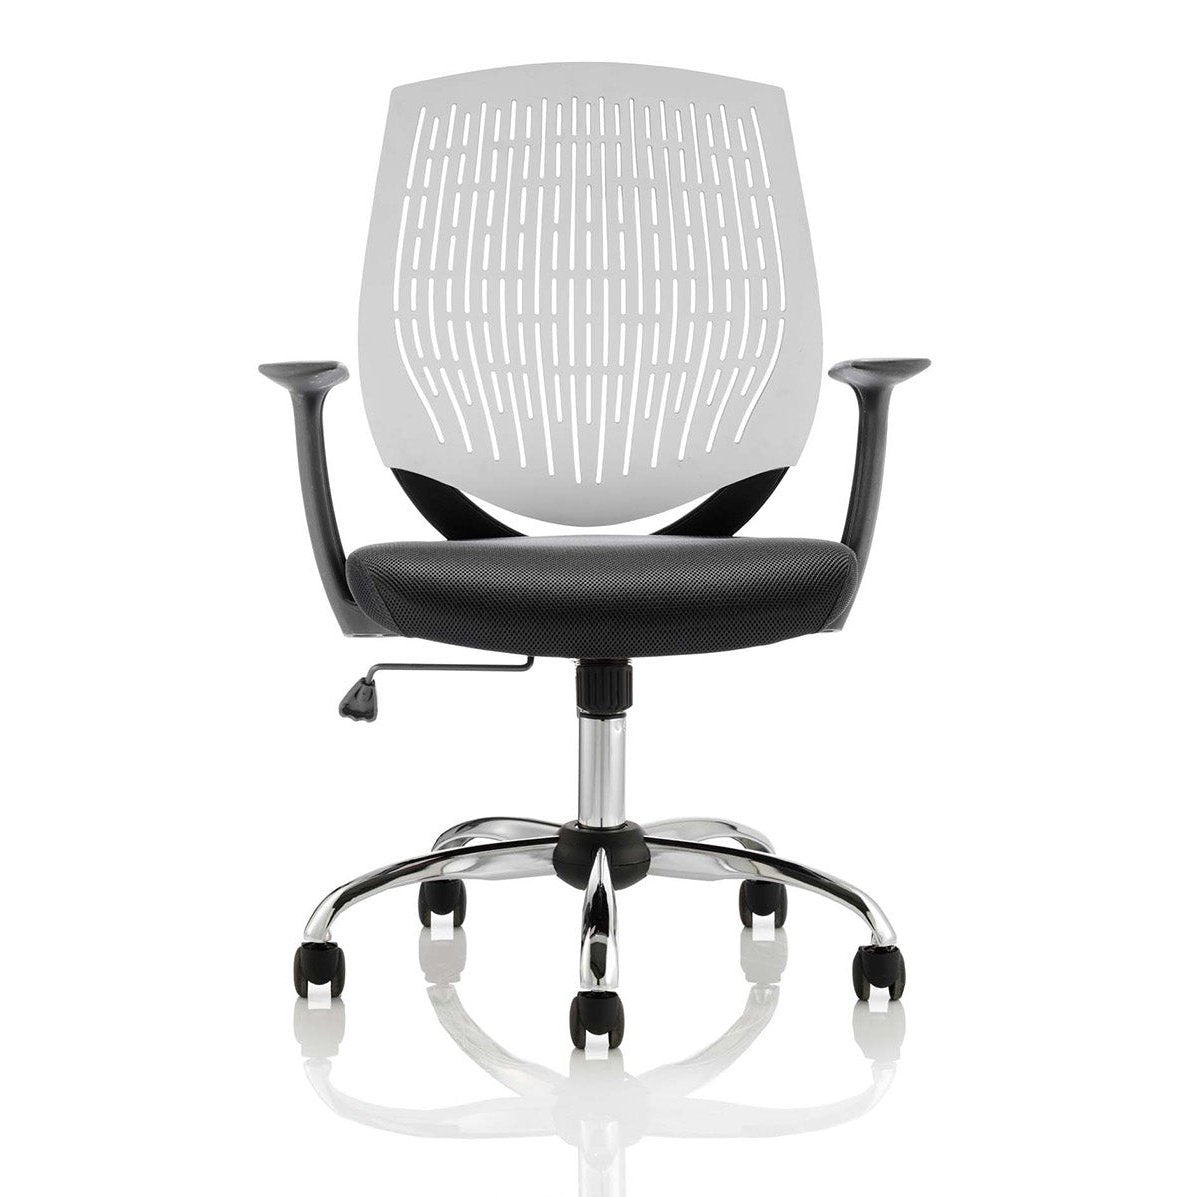 Dura Medium Back Mesh Task Operator Office Chair with Arms - Chrome Metal Frame, Airmesh Fabric Seat, 110kg Capacity, 8hr Usage, Adjustable Height